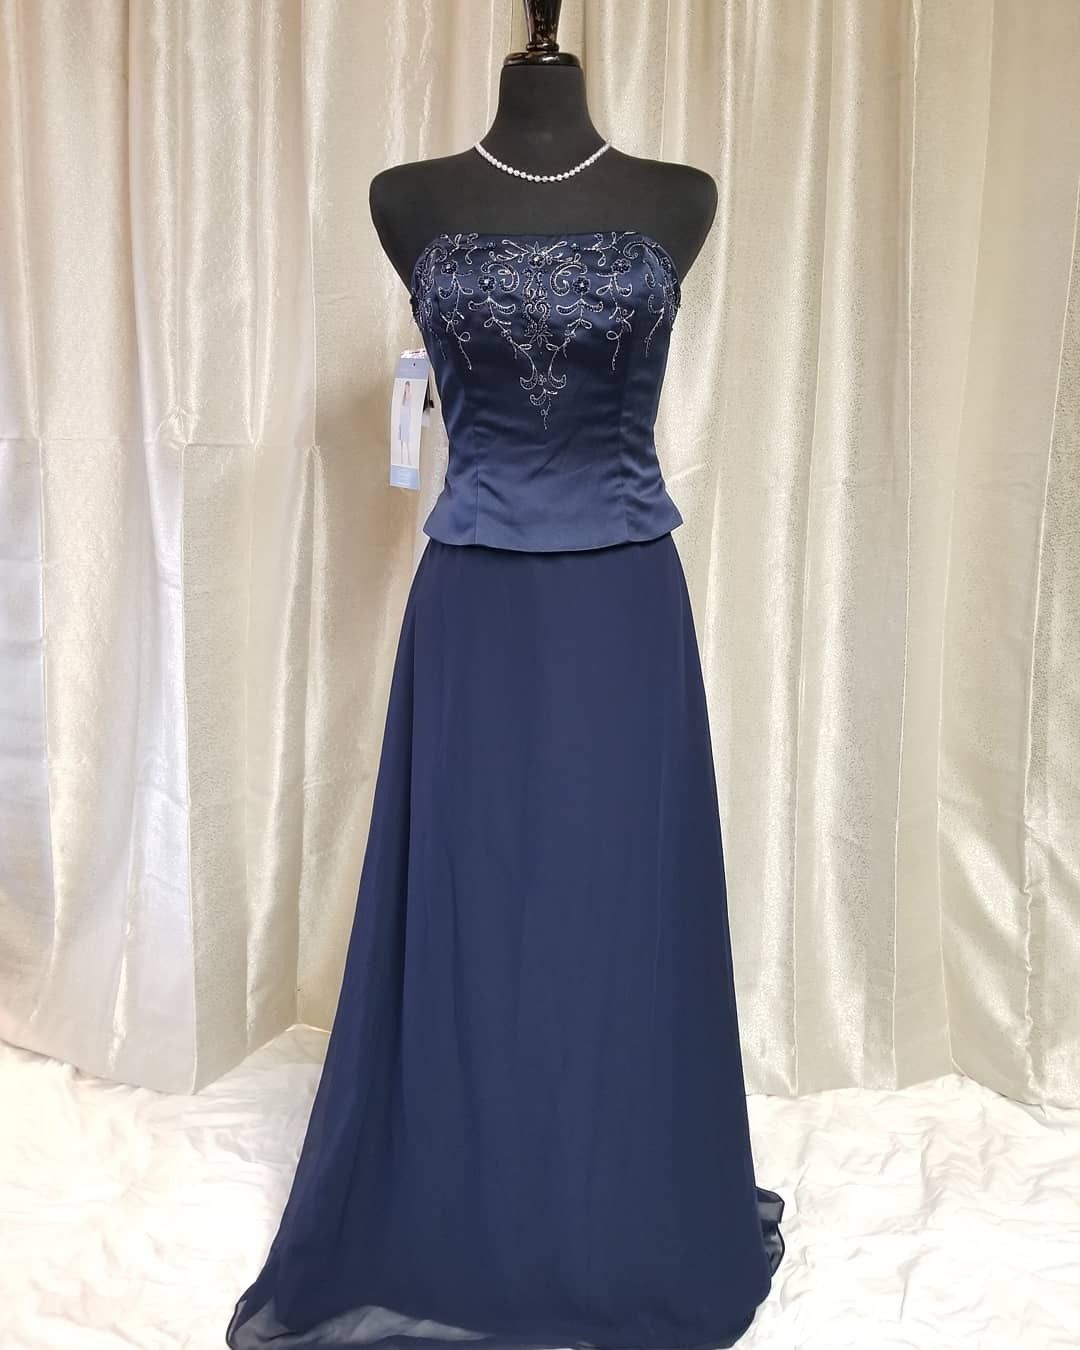 NAVY BLUE PROM , SPECIAL OCCASION, WEDDING, PARTY DRESS